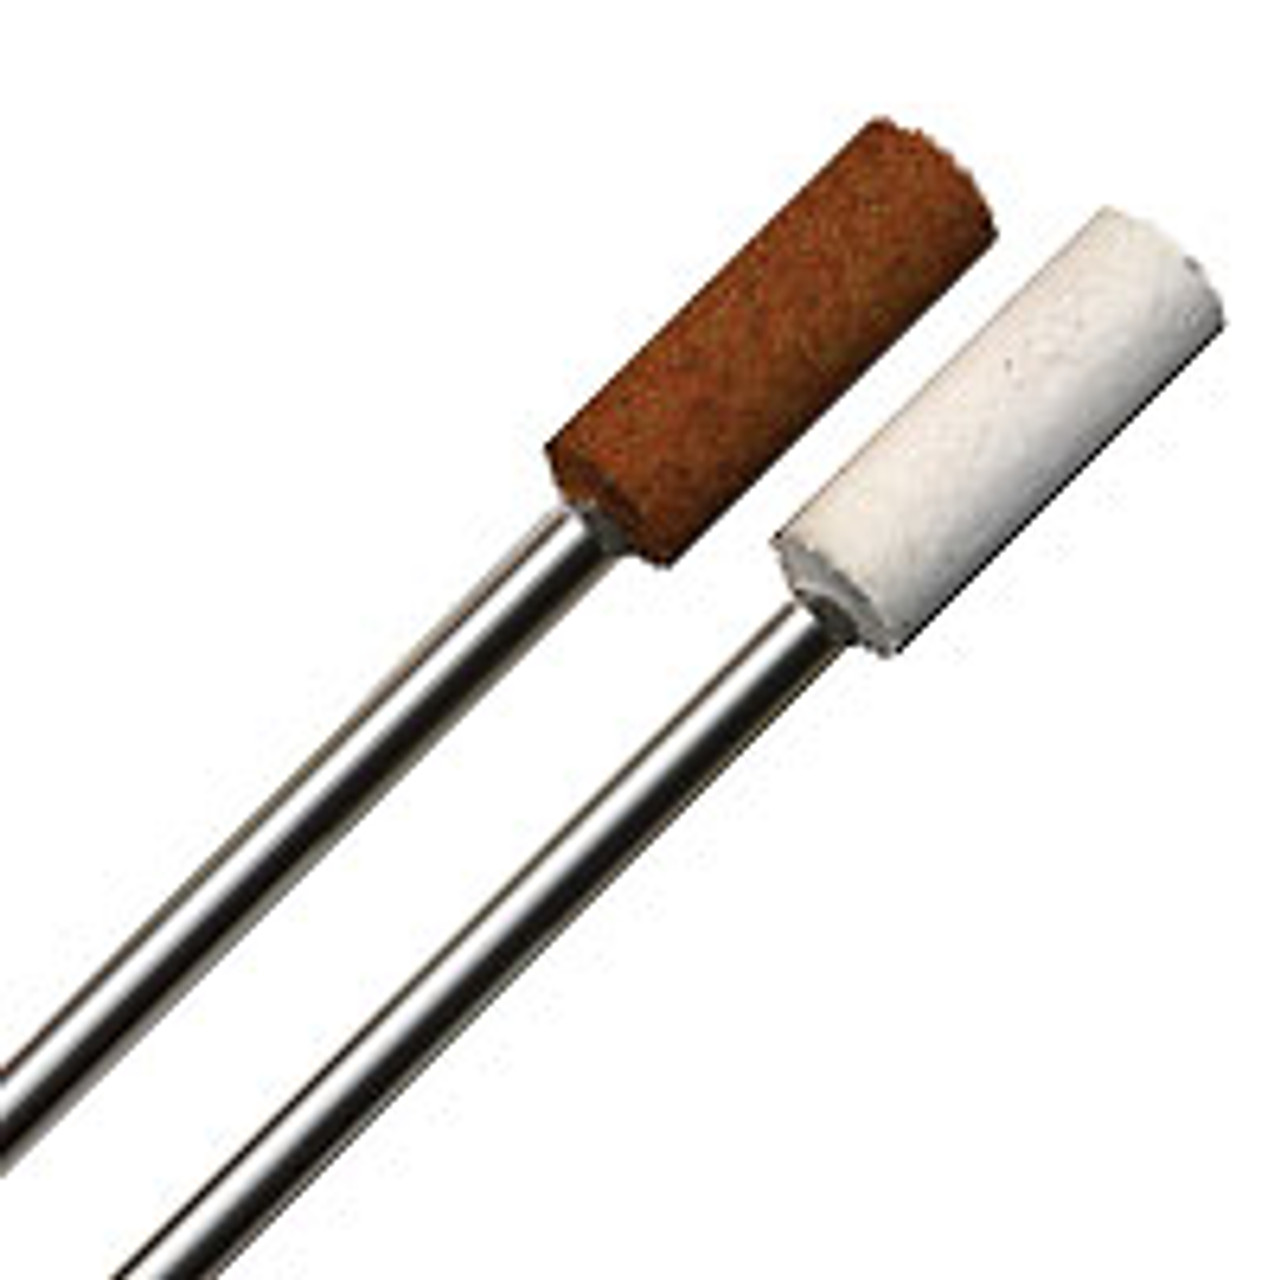 Aluminum Oxide Point 3/16" Cylinder (red) Coarse grit and (White) Fine grit.